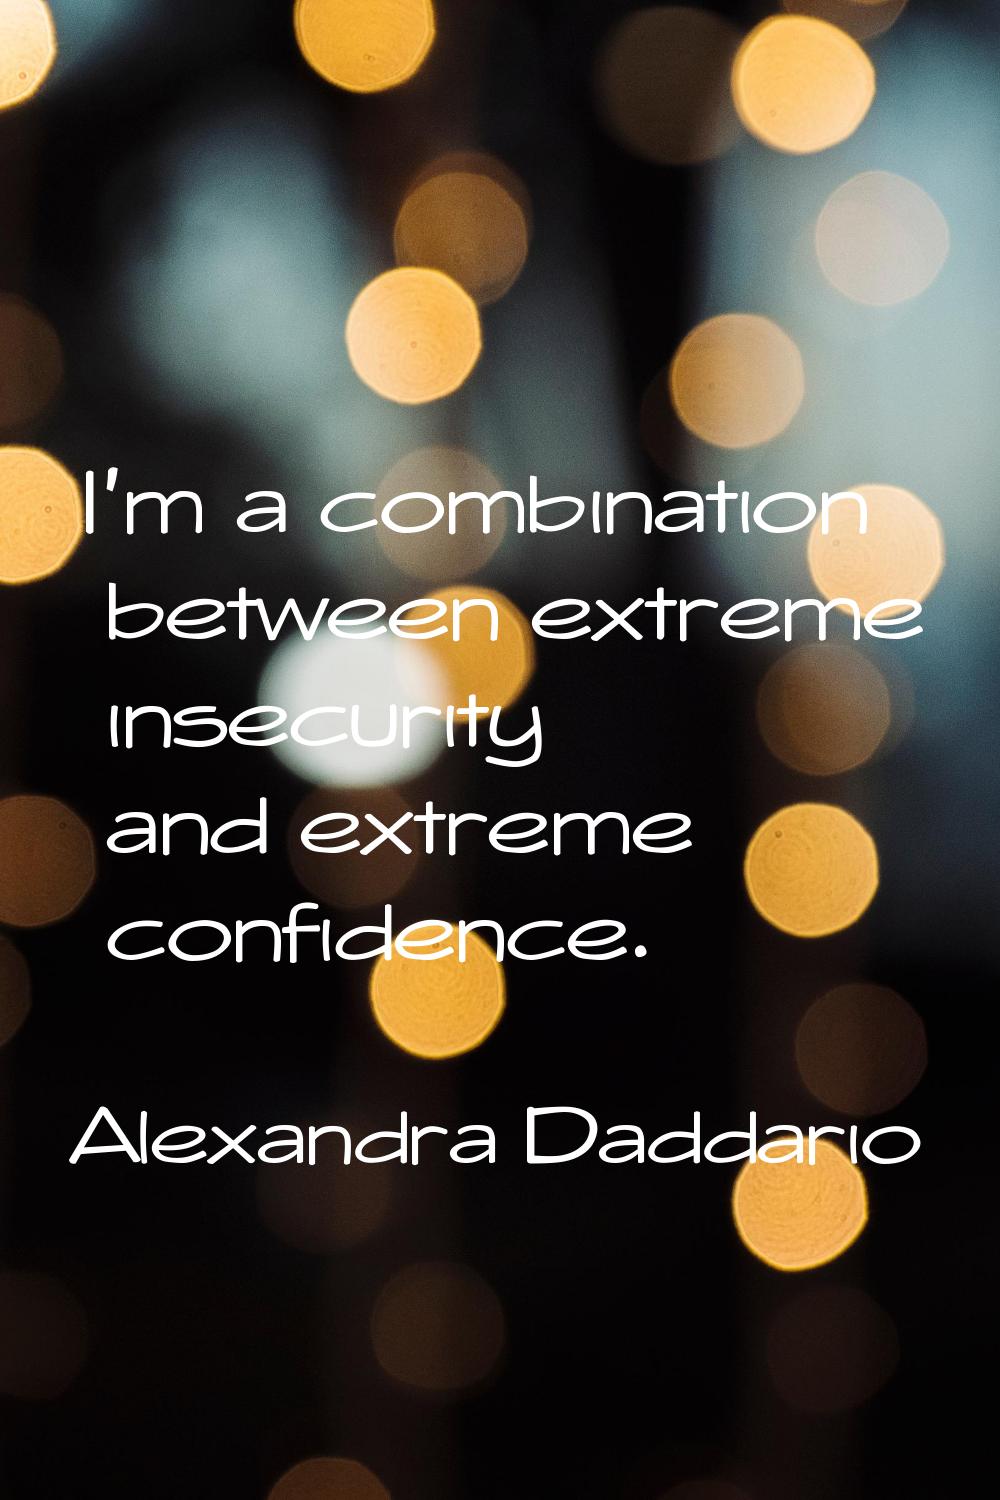 I'm a combination between extreme insecurity and extreme confidence.